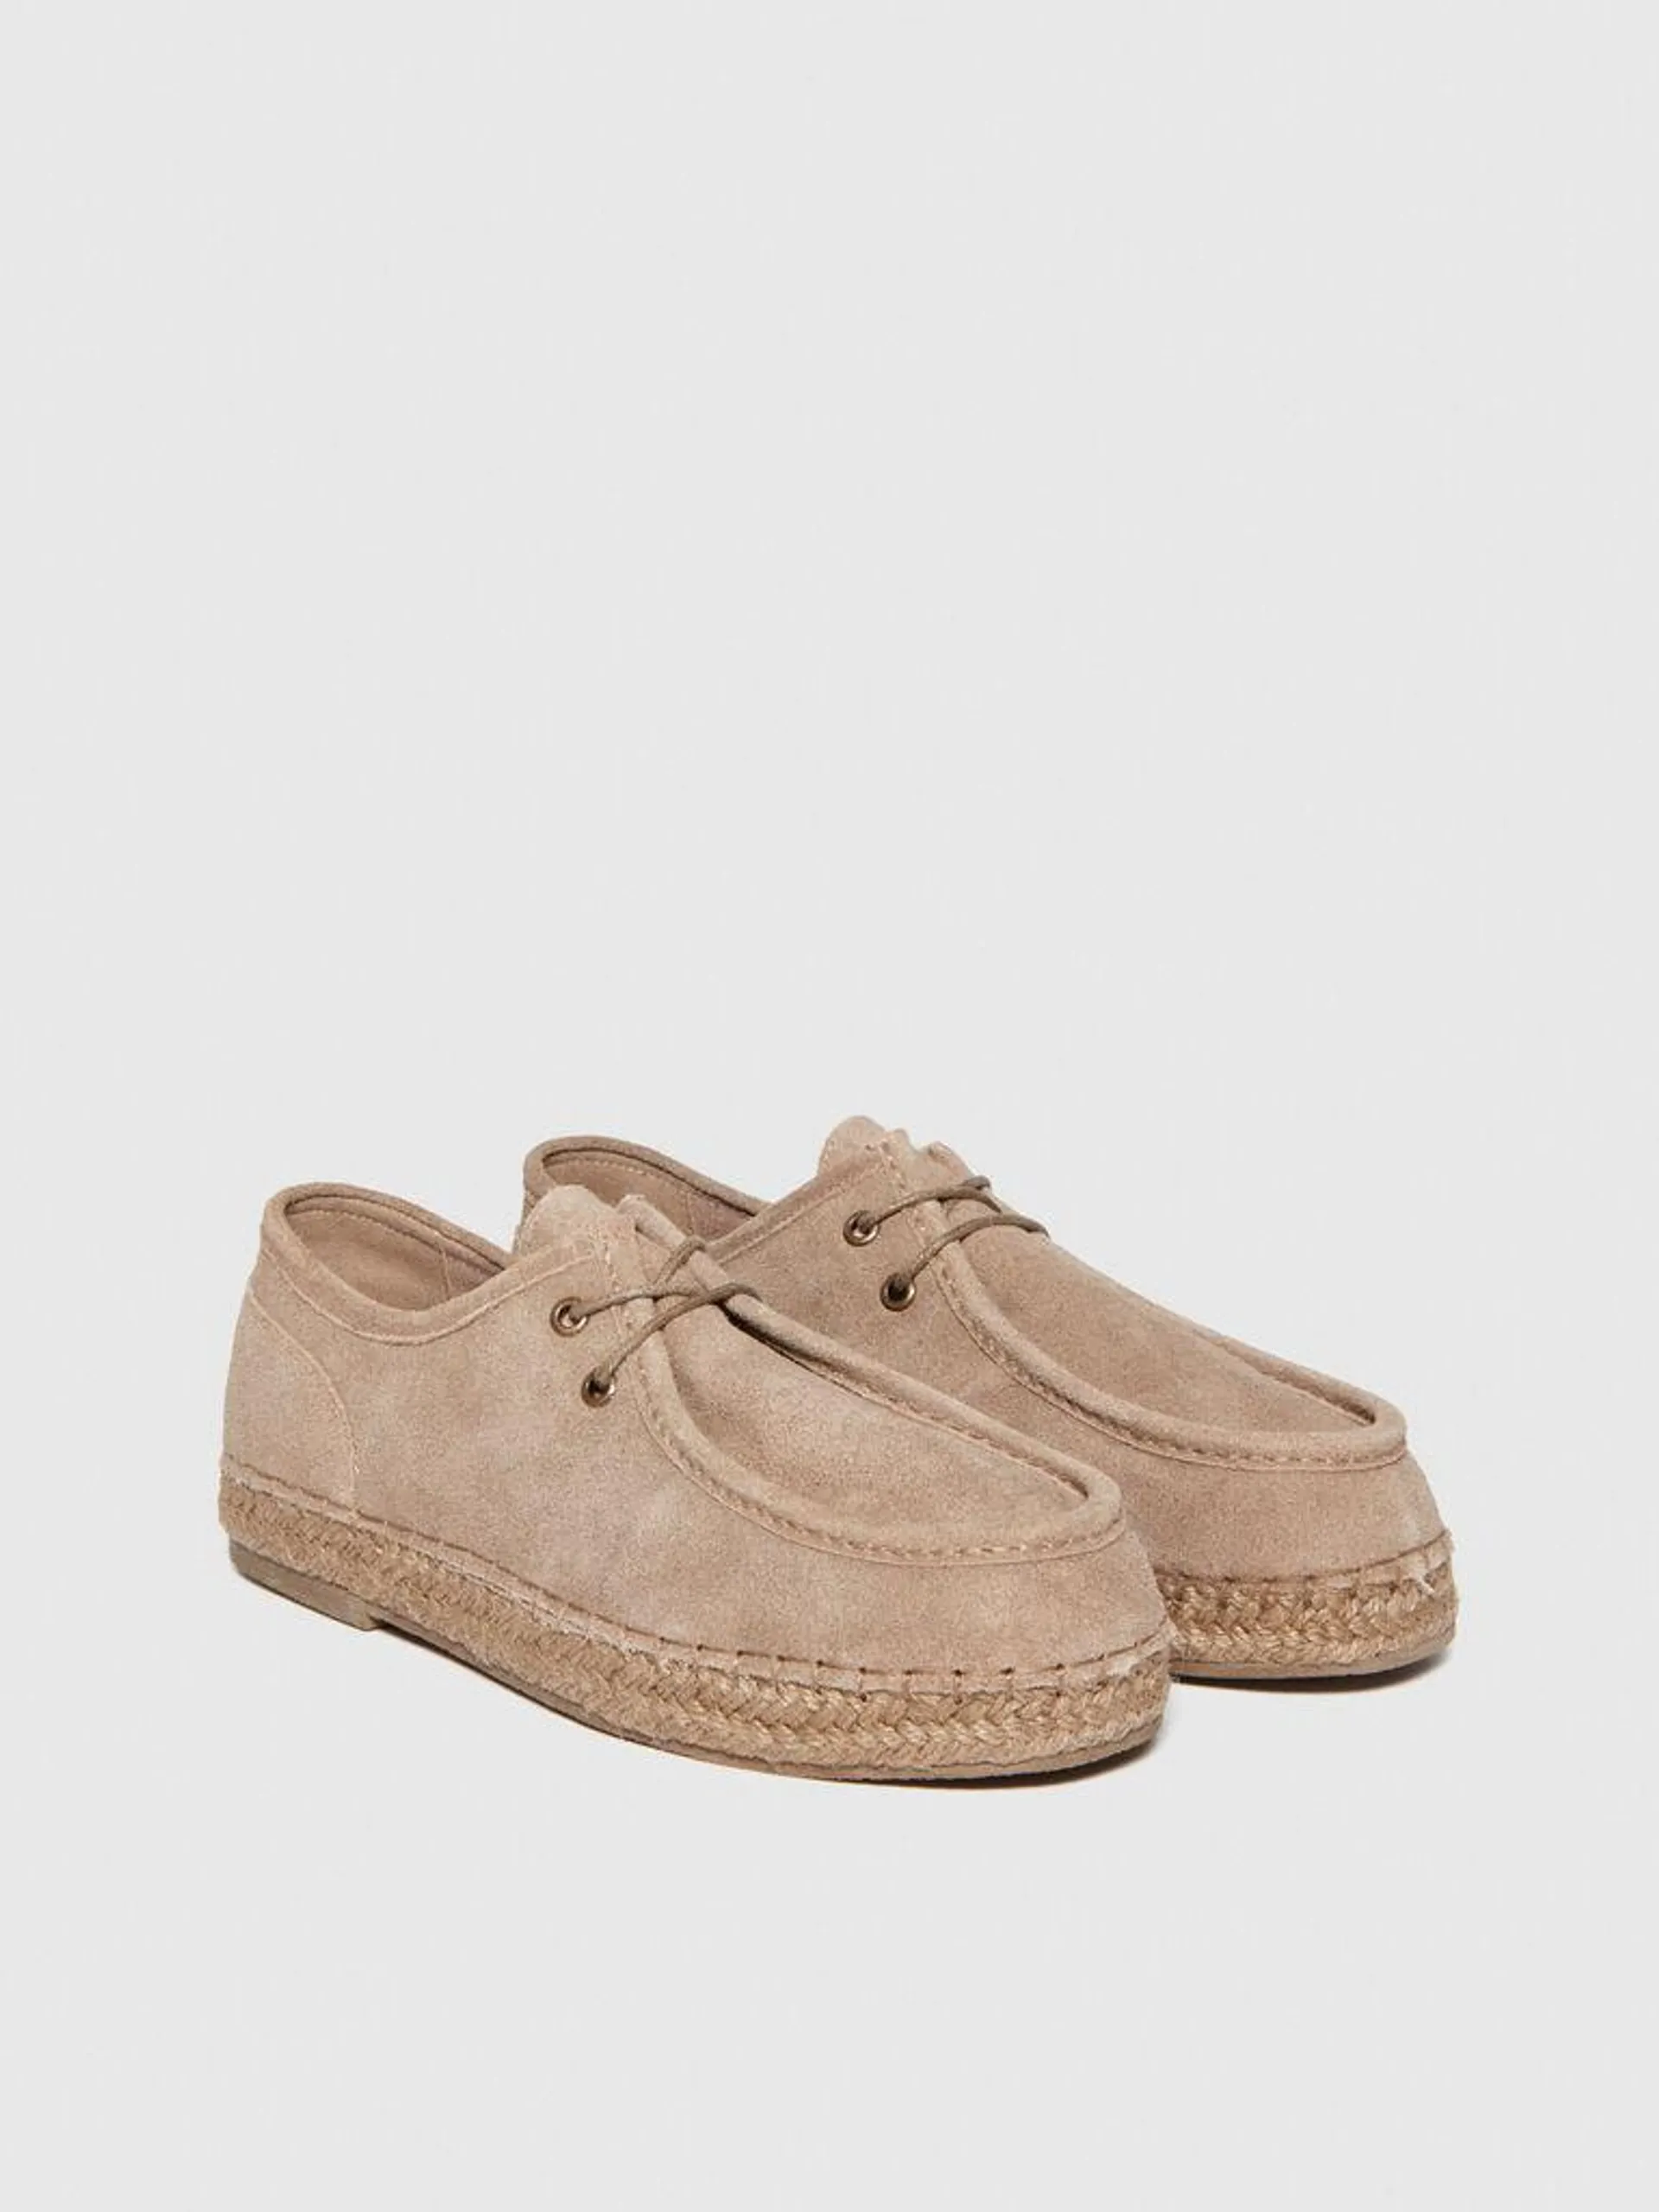 Lace-up espadrilles in suede